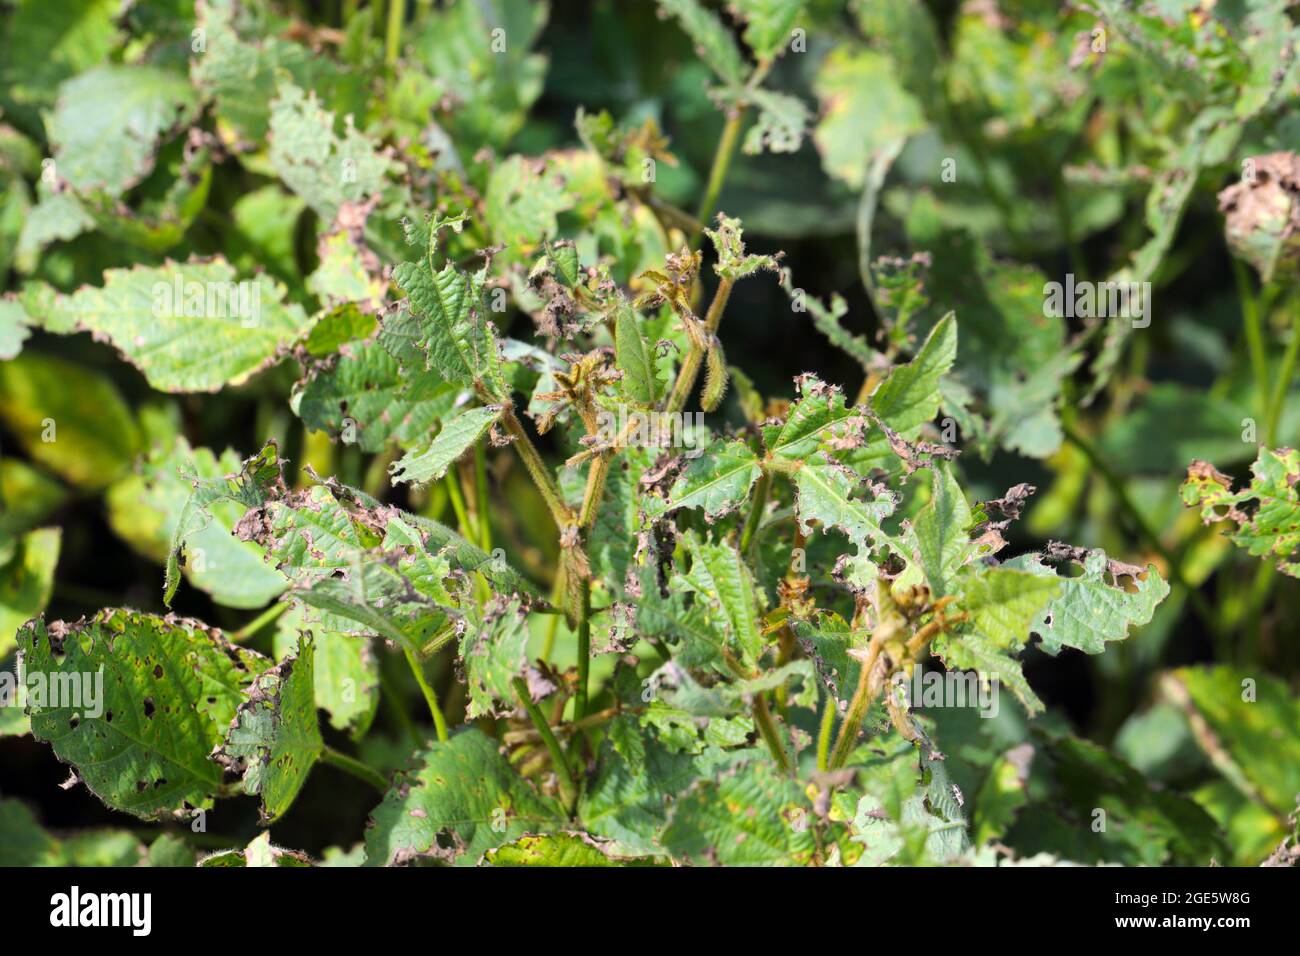 Soy bean plants damaged by Lupine beetle - Charagmus (formerly Sitona) gressorius and griseus - a specieses of weevils Curculionidae, pest of Fabaceae Stock Photo